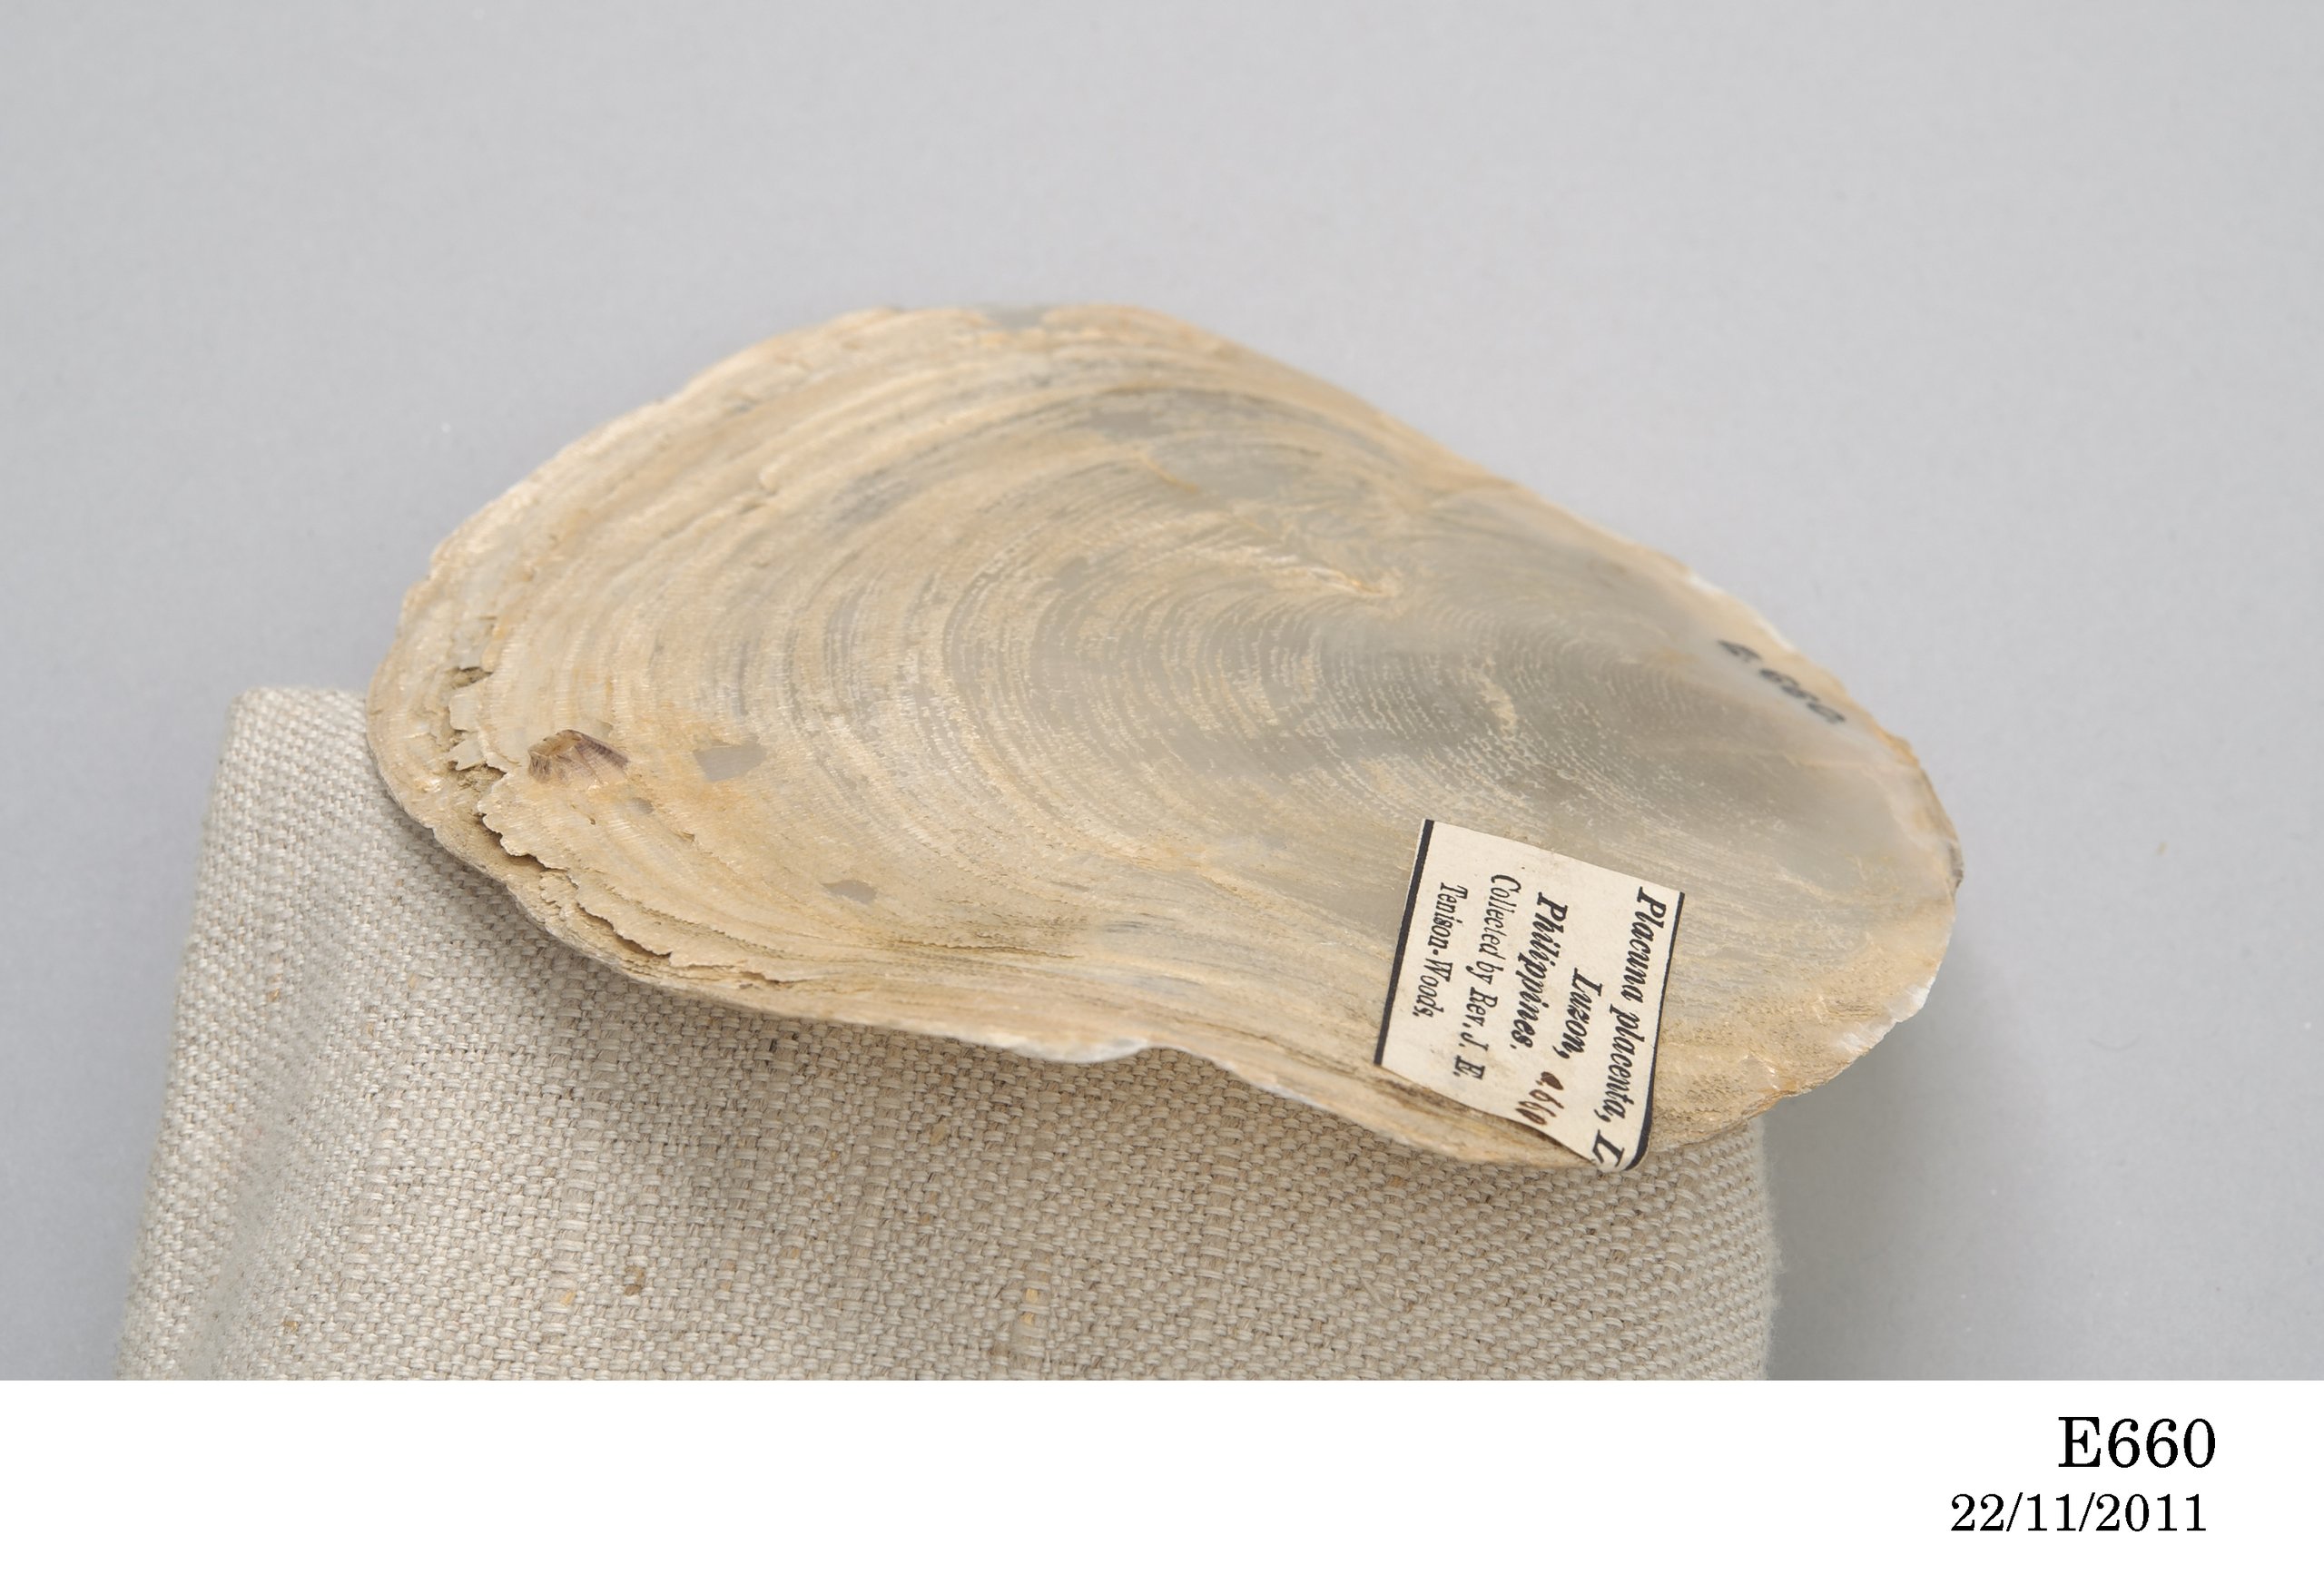 Placuna placenta (Windowpane oyster) shell from Singapore collected by Julian Tennison-Woods